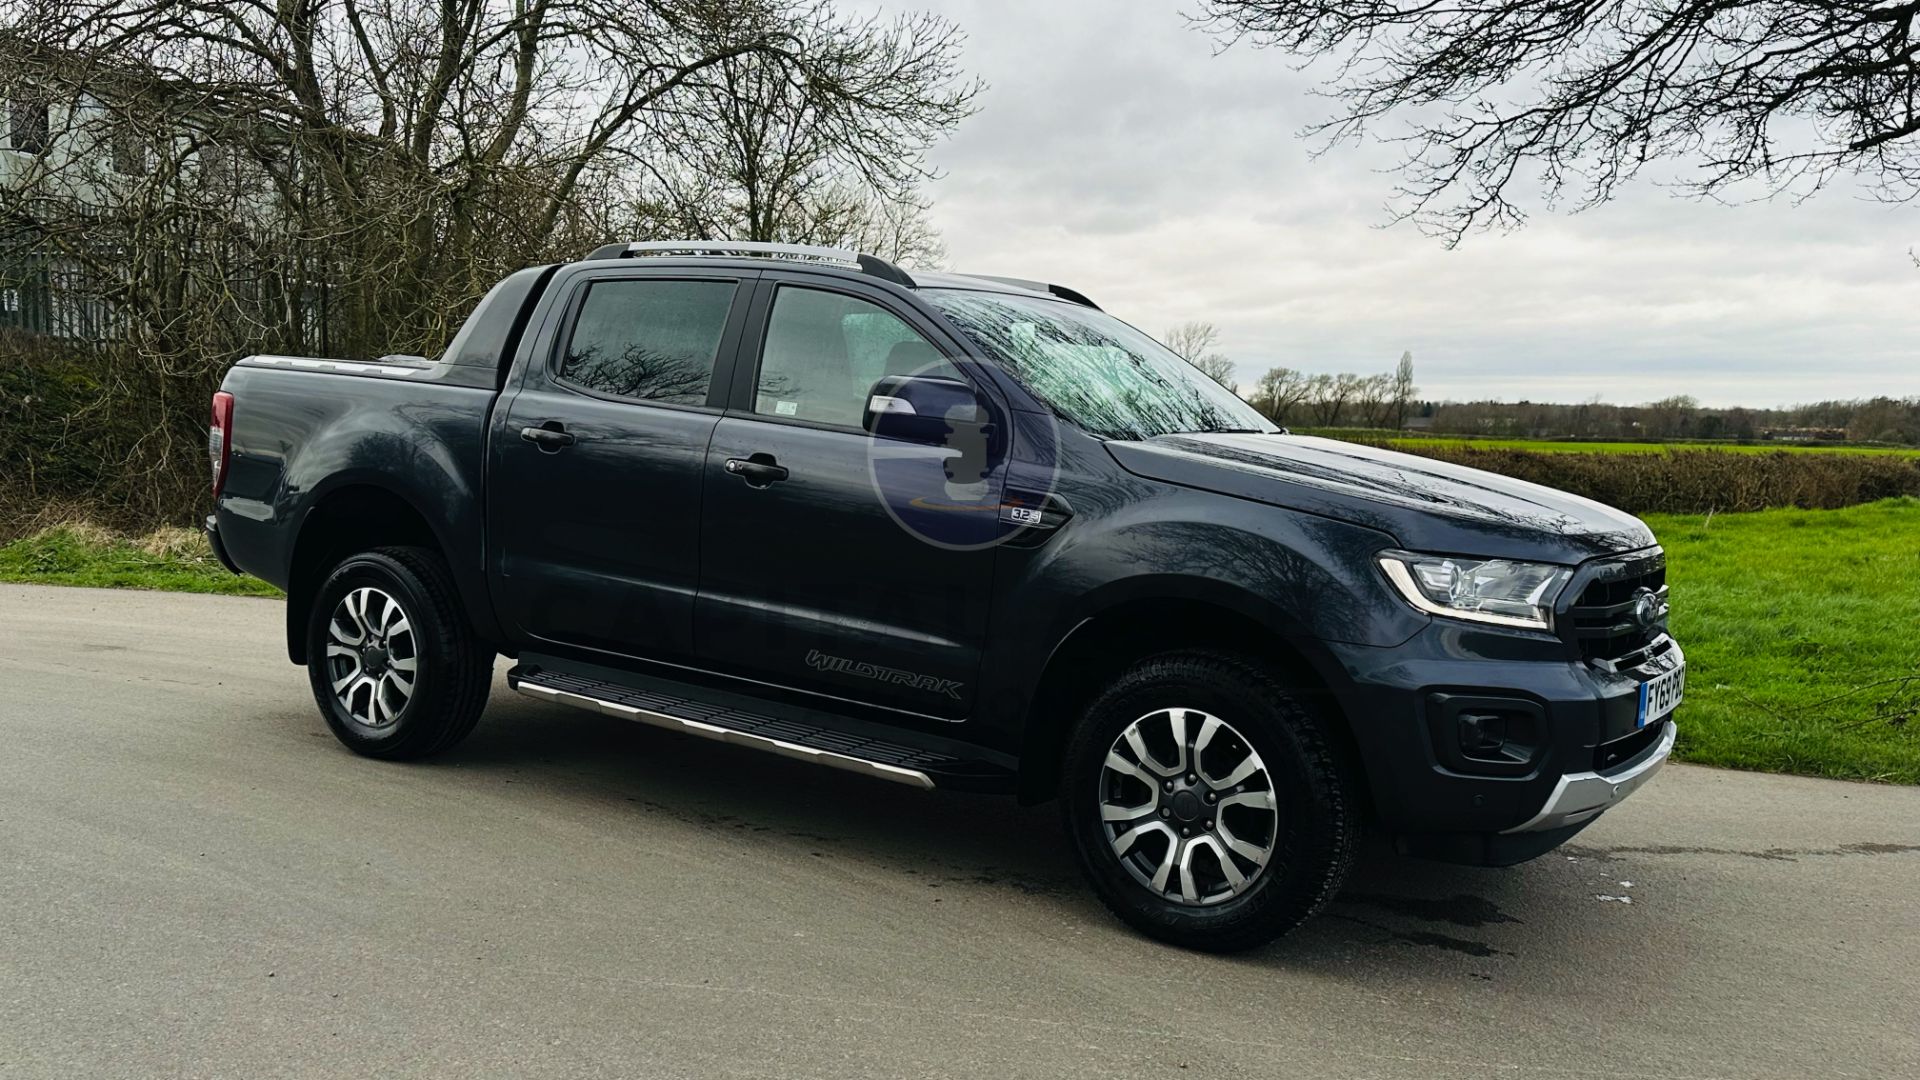 FORD RANGER *WILDTRAK EDITION* DOUBLE CAB PICK-UP (2020 - EURO 6) 3.2 TDCI - AUTOMATIC *HUGE SPEC* - Image 2 of 49